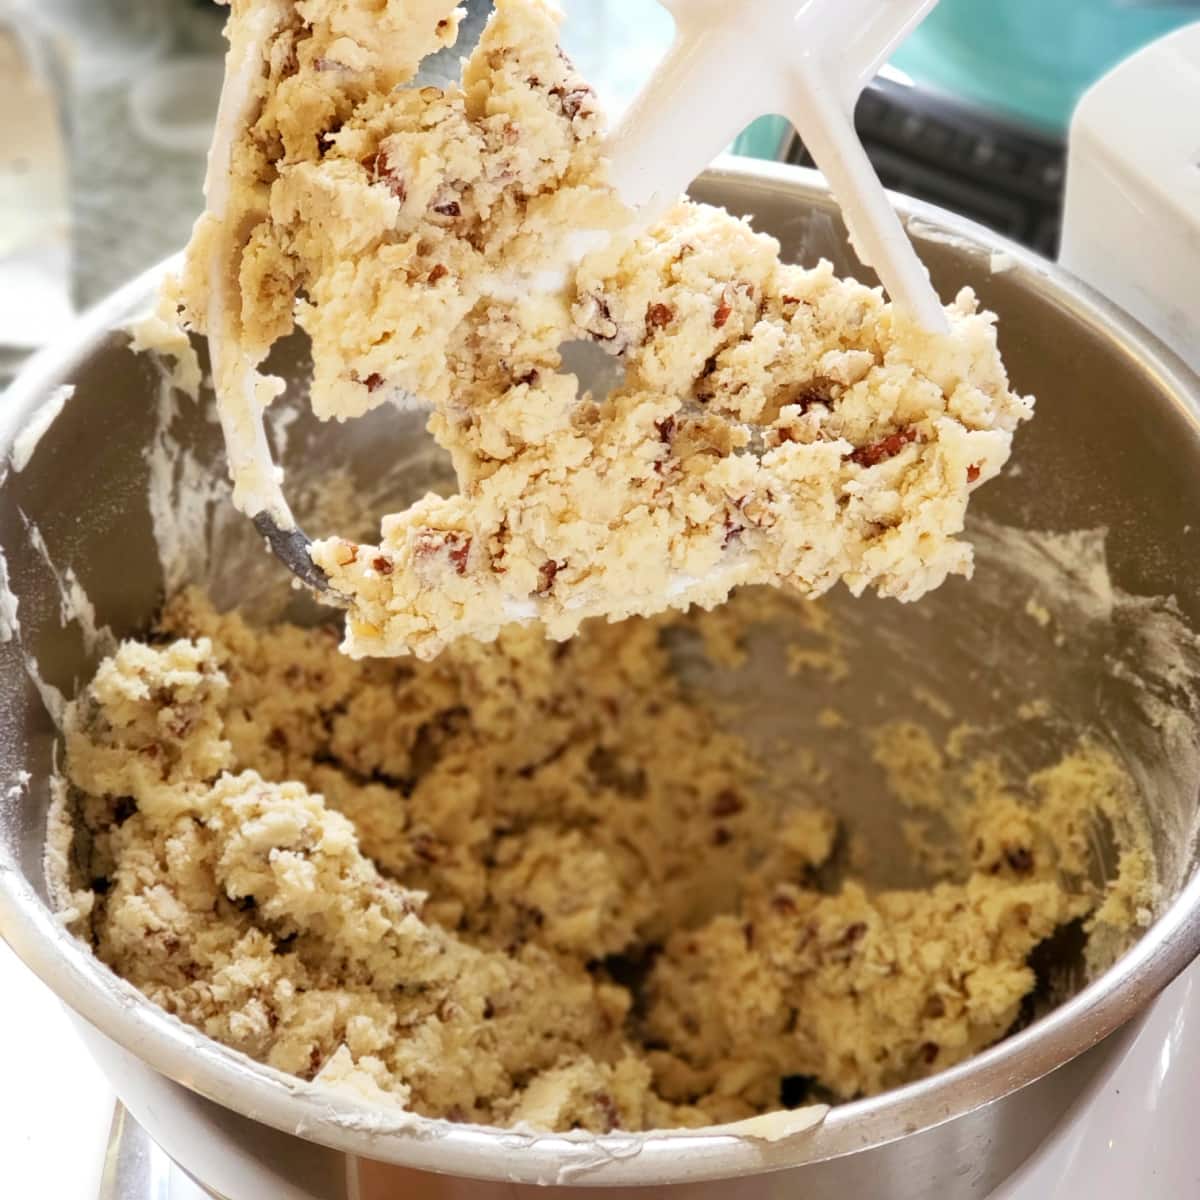 Thick pecan dough for Mexican Wedding Cookies clings to the white beater of a stand mixer